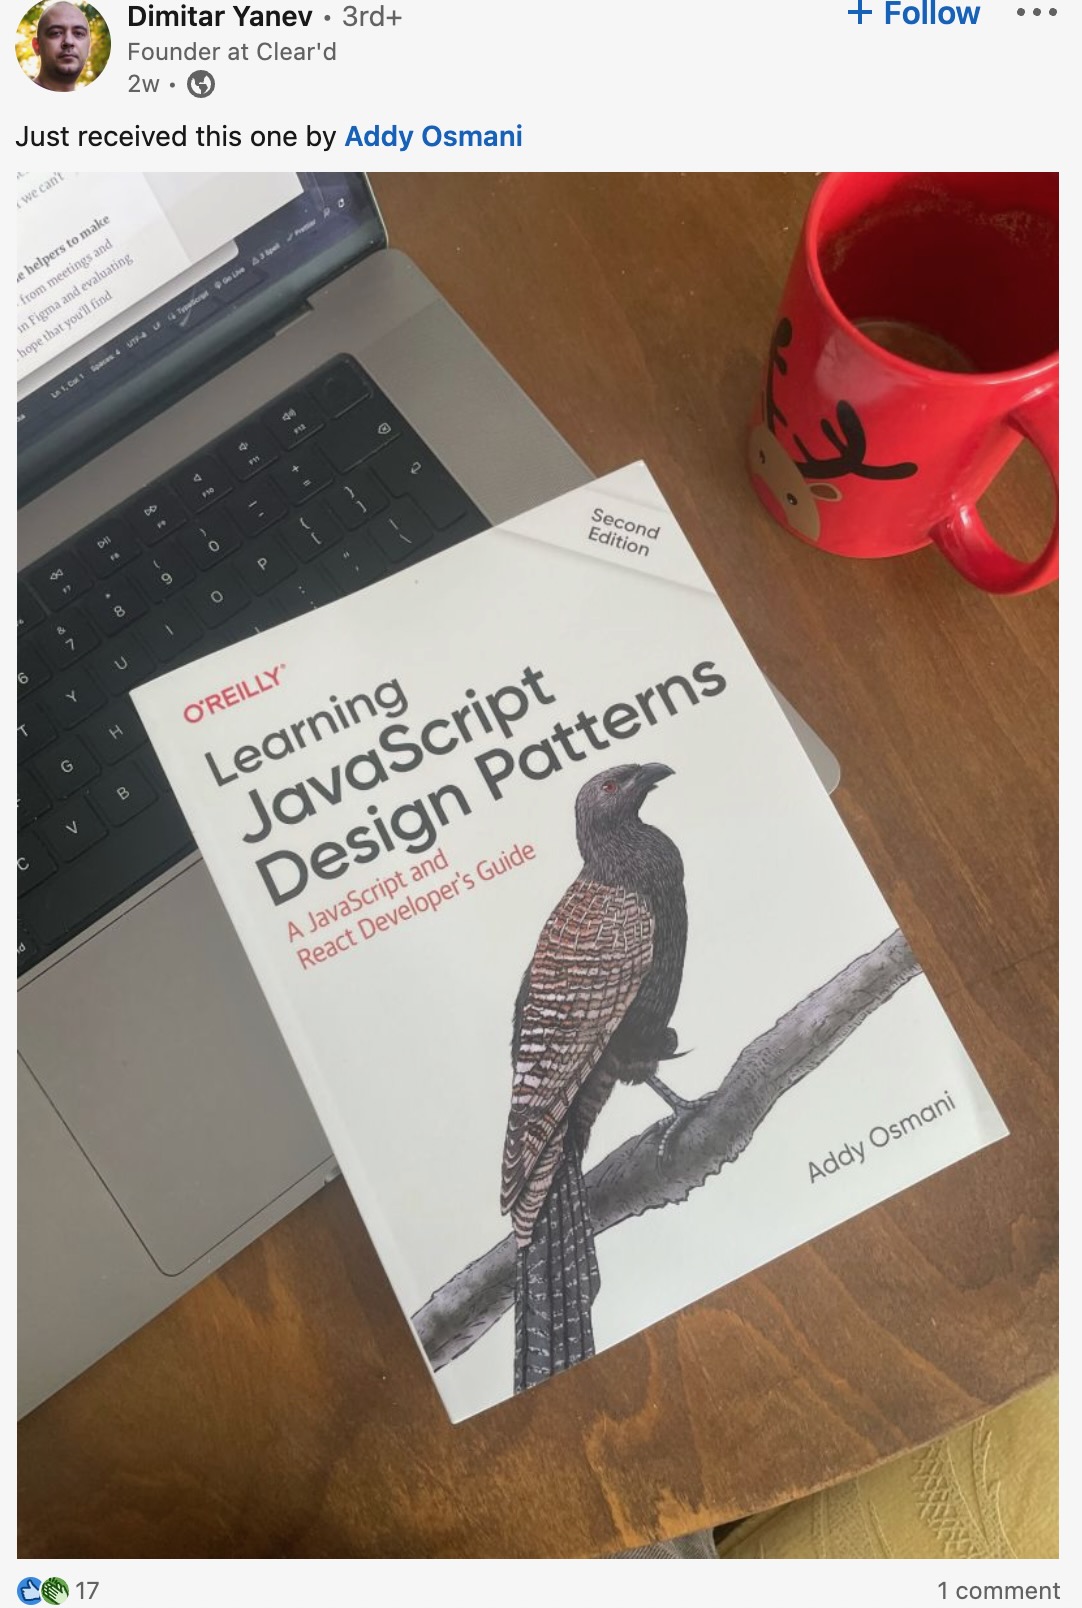 photo of learning javascript design patterns book